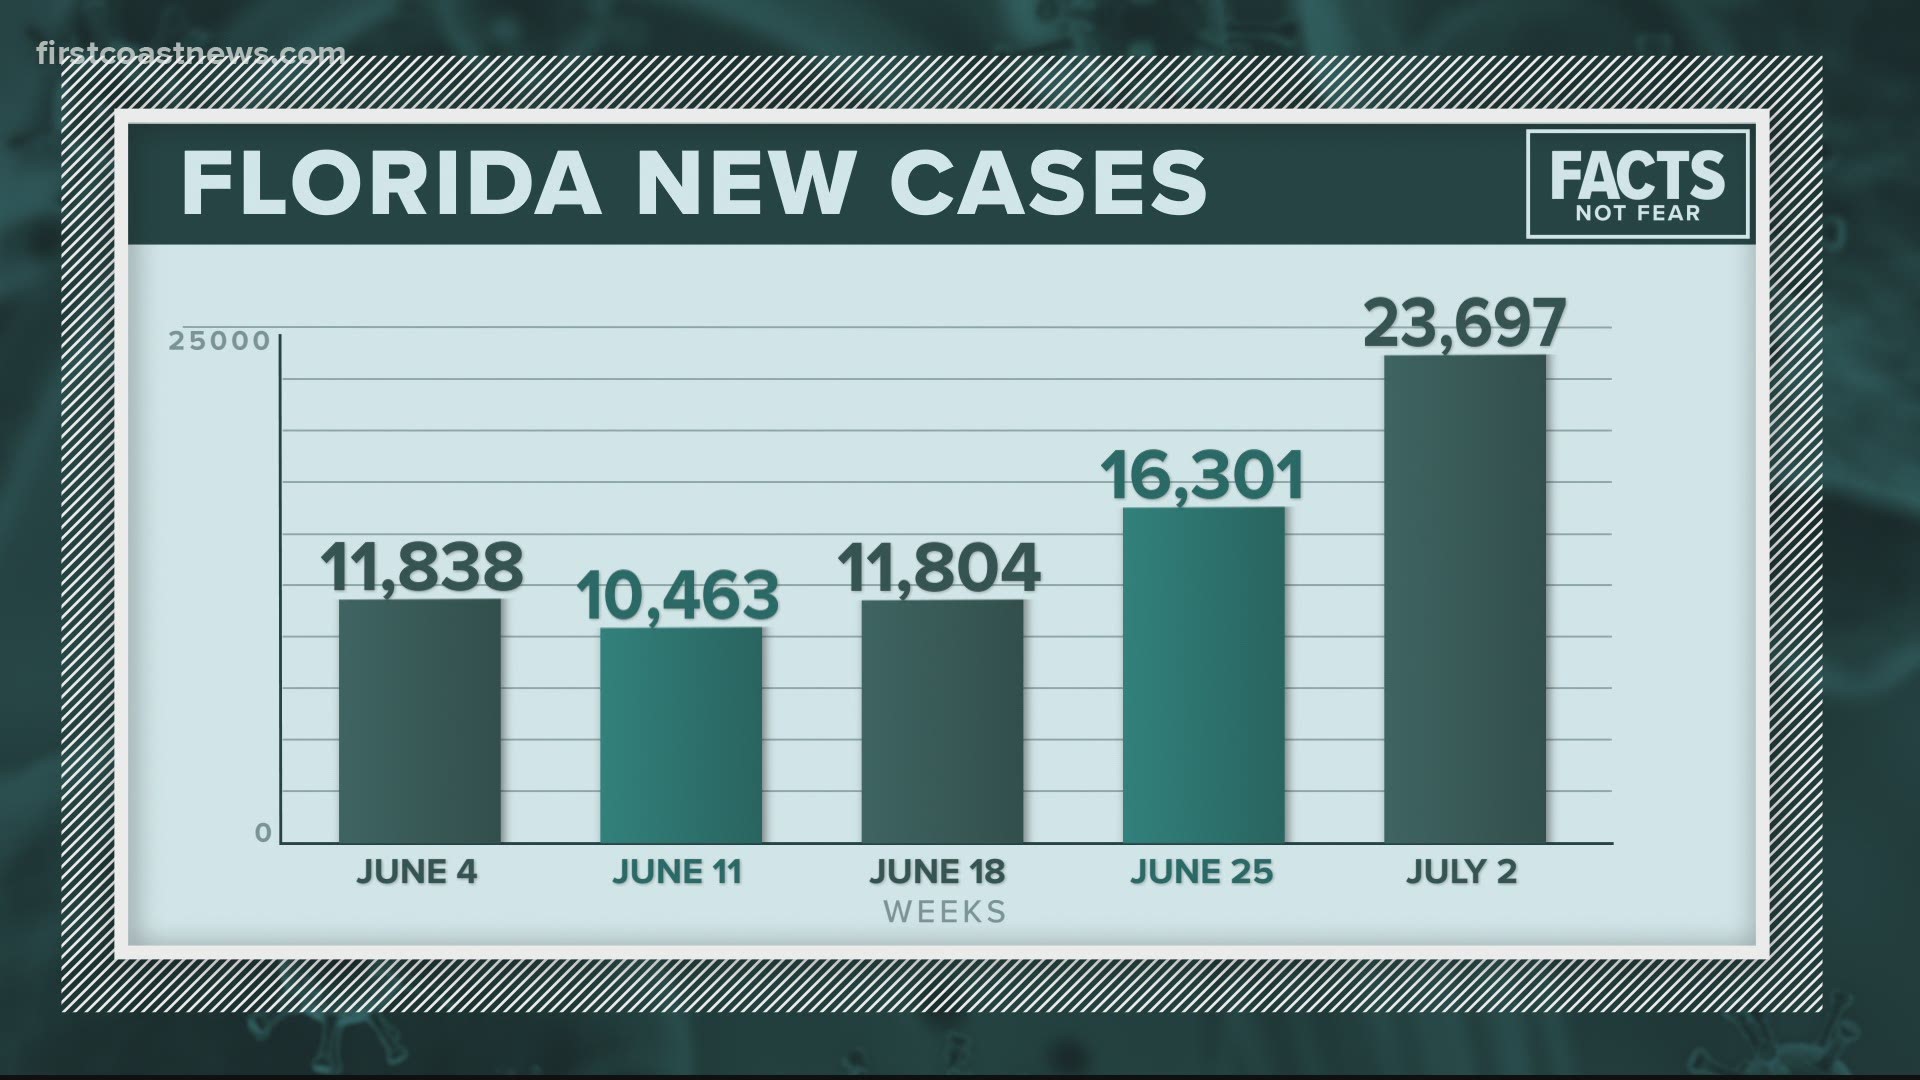 The coronavirus numbers across the state have increased dramatically.